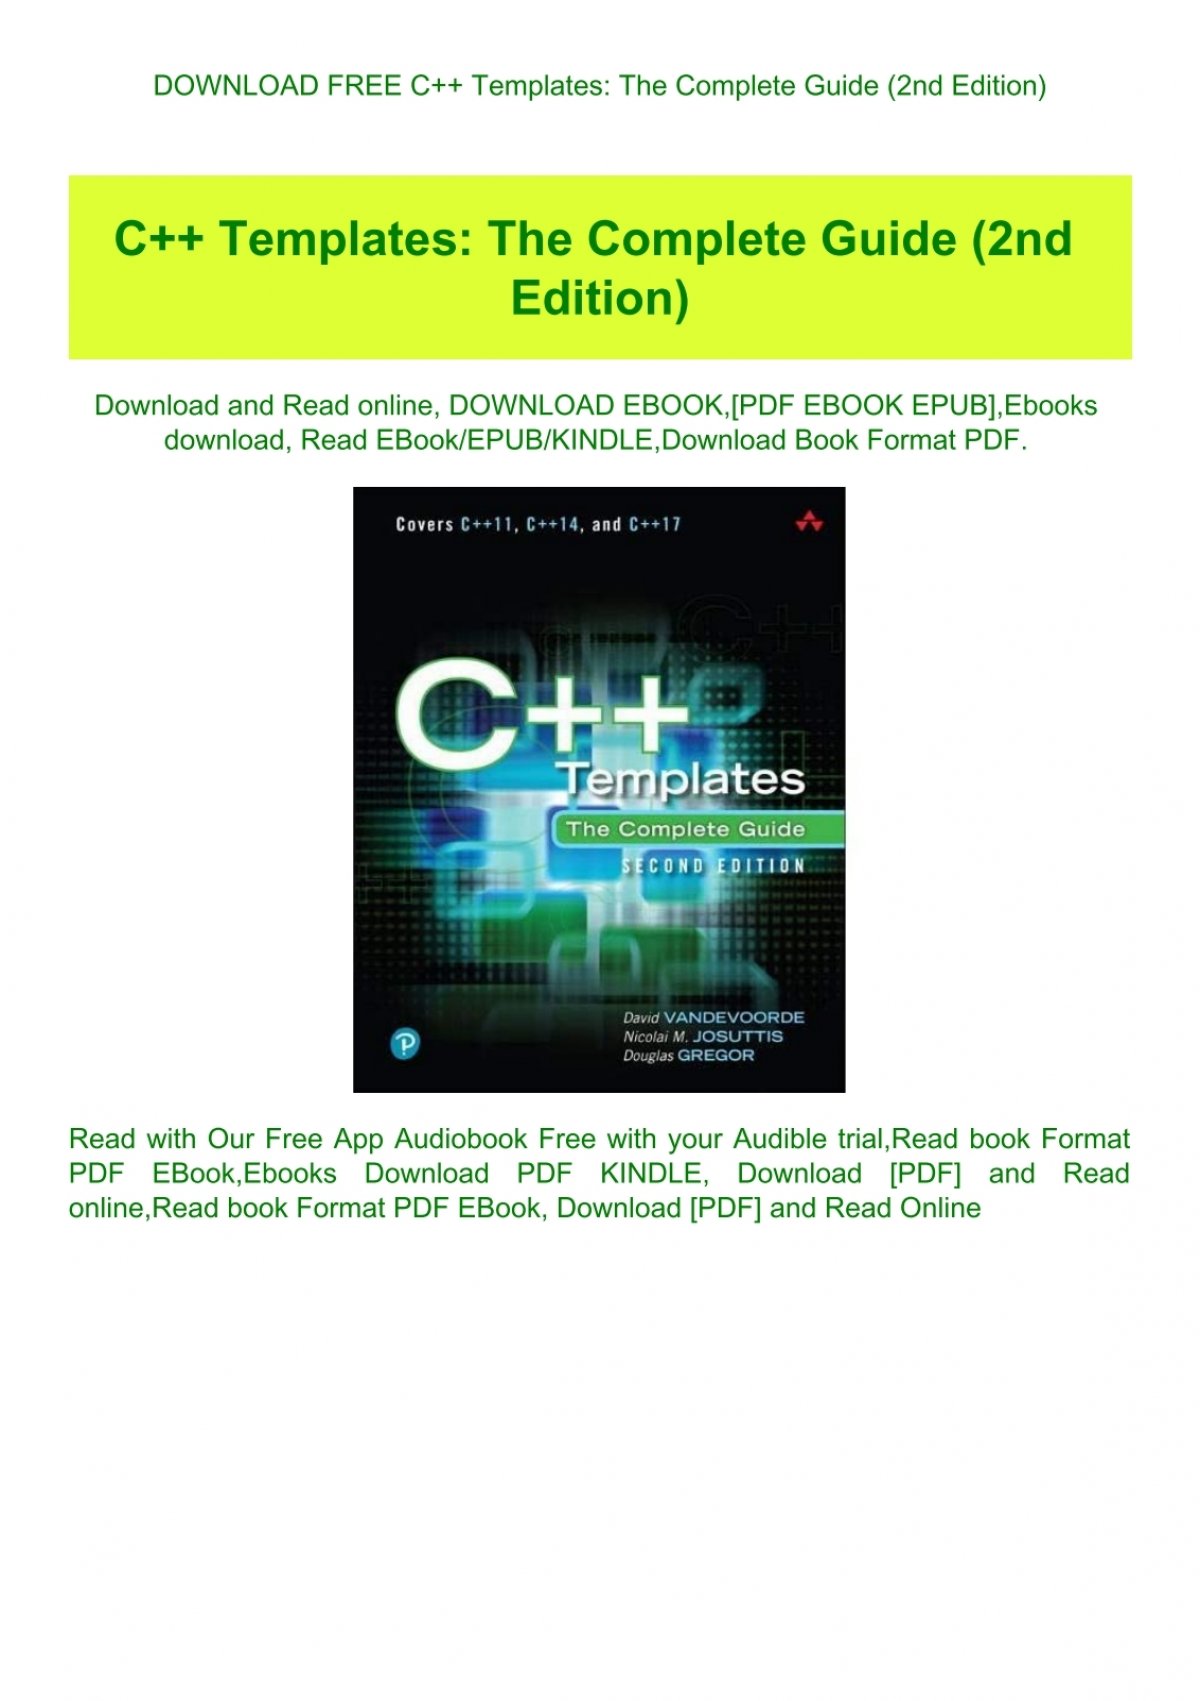 download-free-c-templates-the-complete-guide-2nd-edition-download-e-b-o-o-k